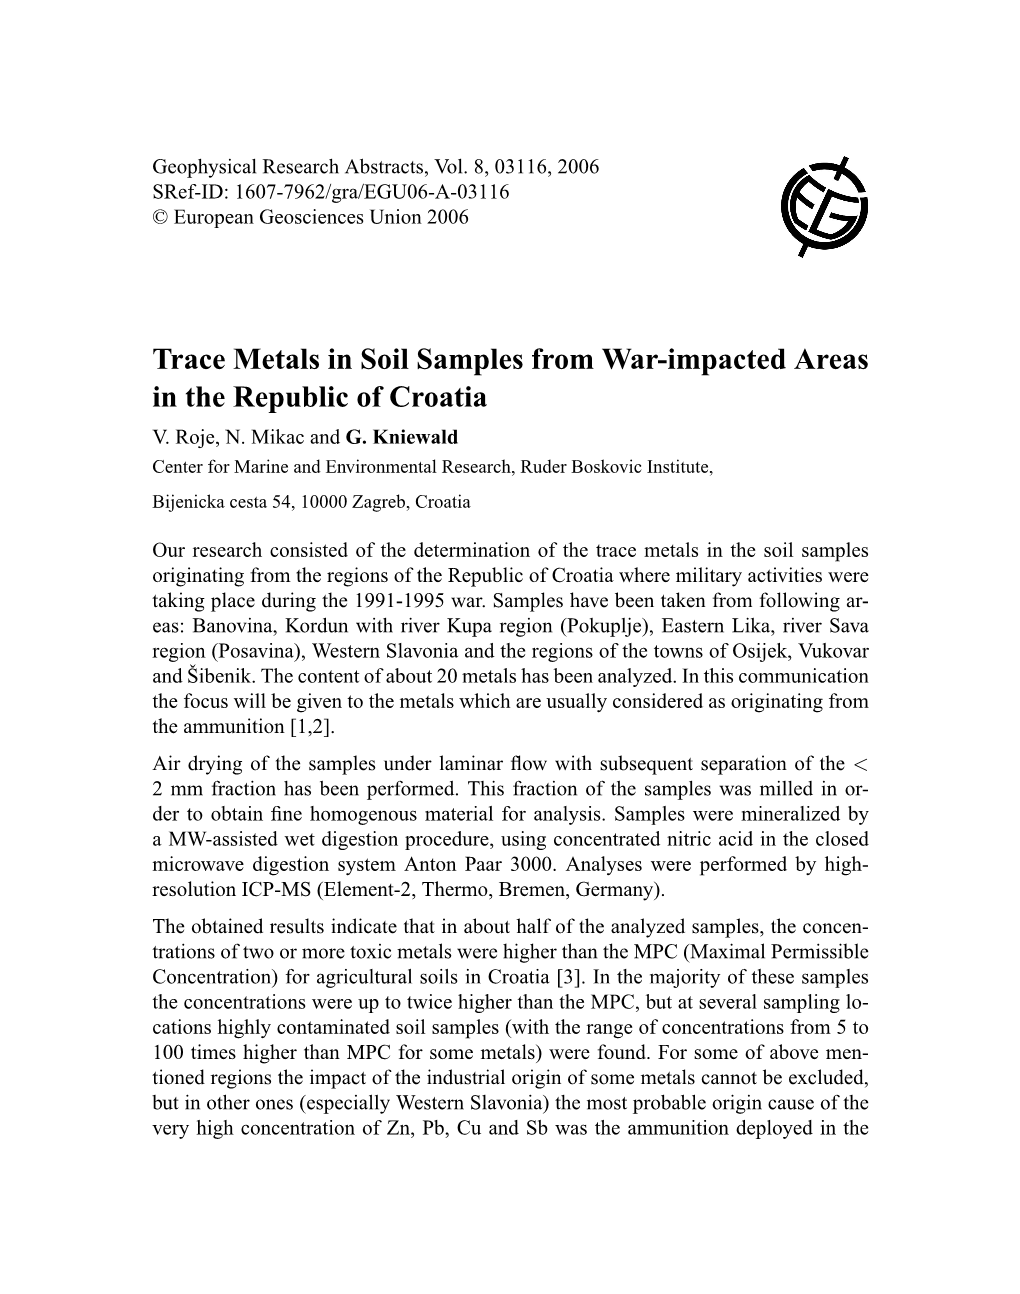 Trace Metals in Soil Samples from War-Impacted Areas in the Republic of Croatia V